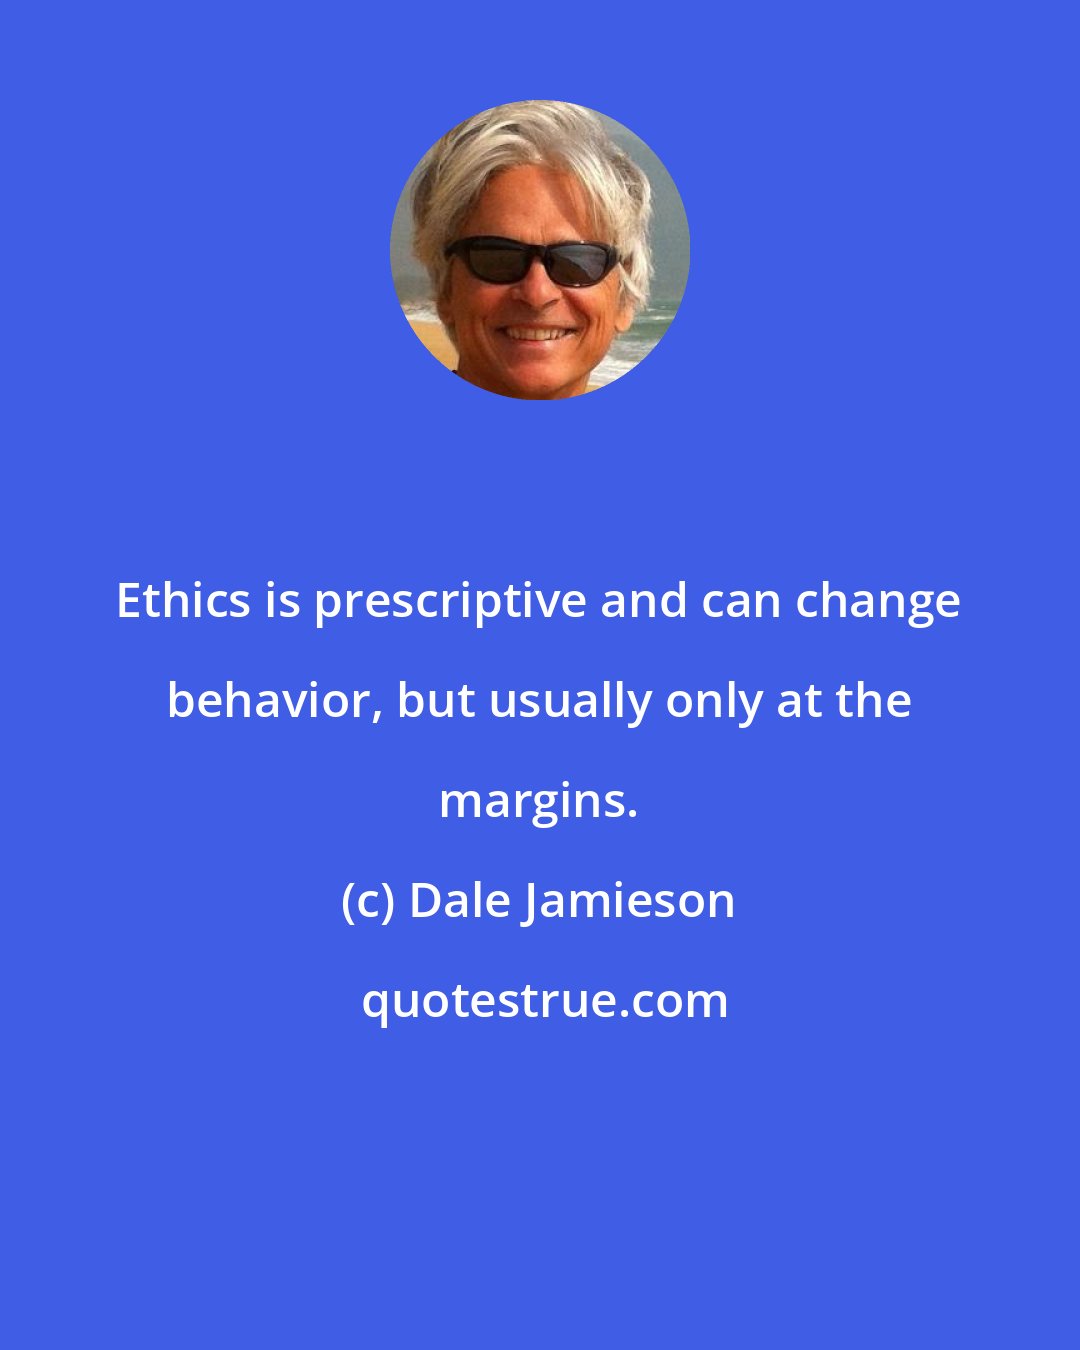 Dale Jamieson: Ethics is prescriptive and can change behavior, but usually only at the margins.